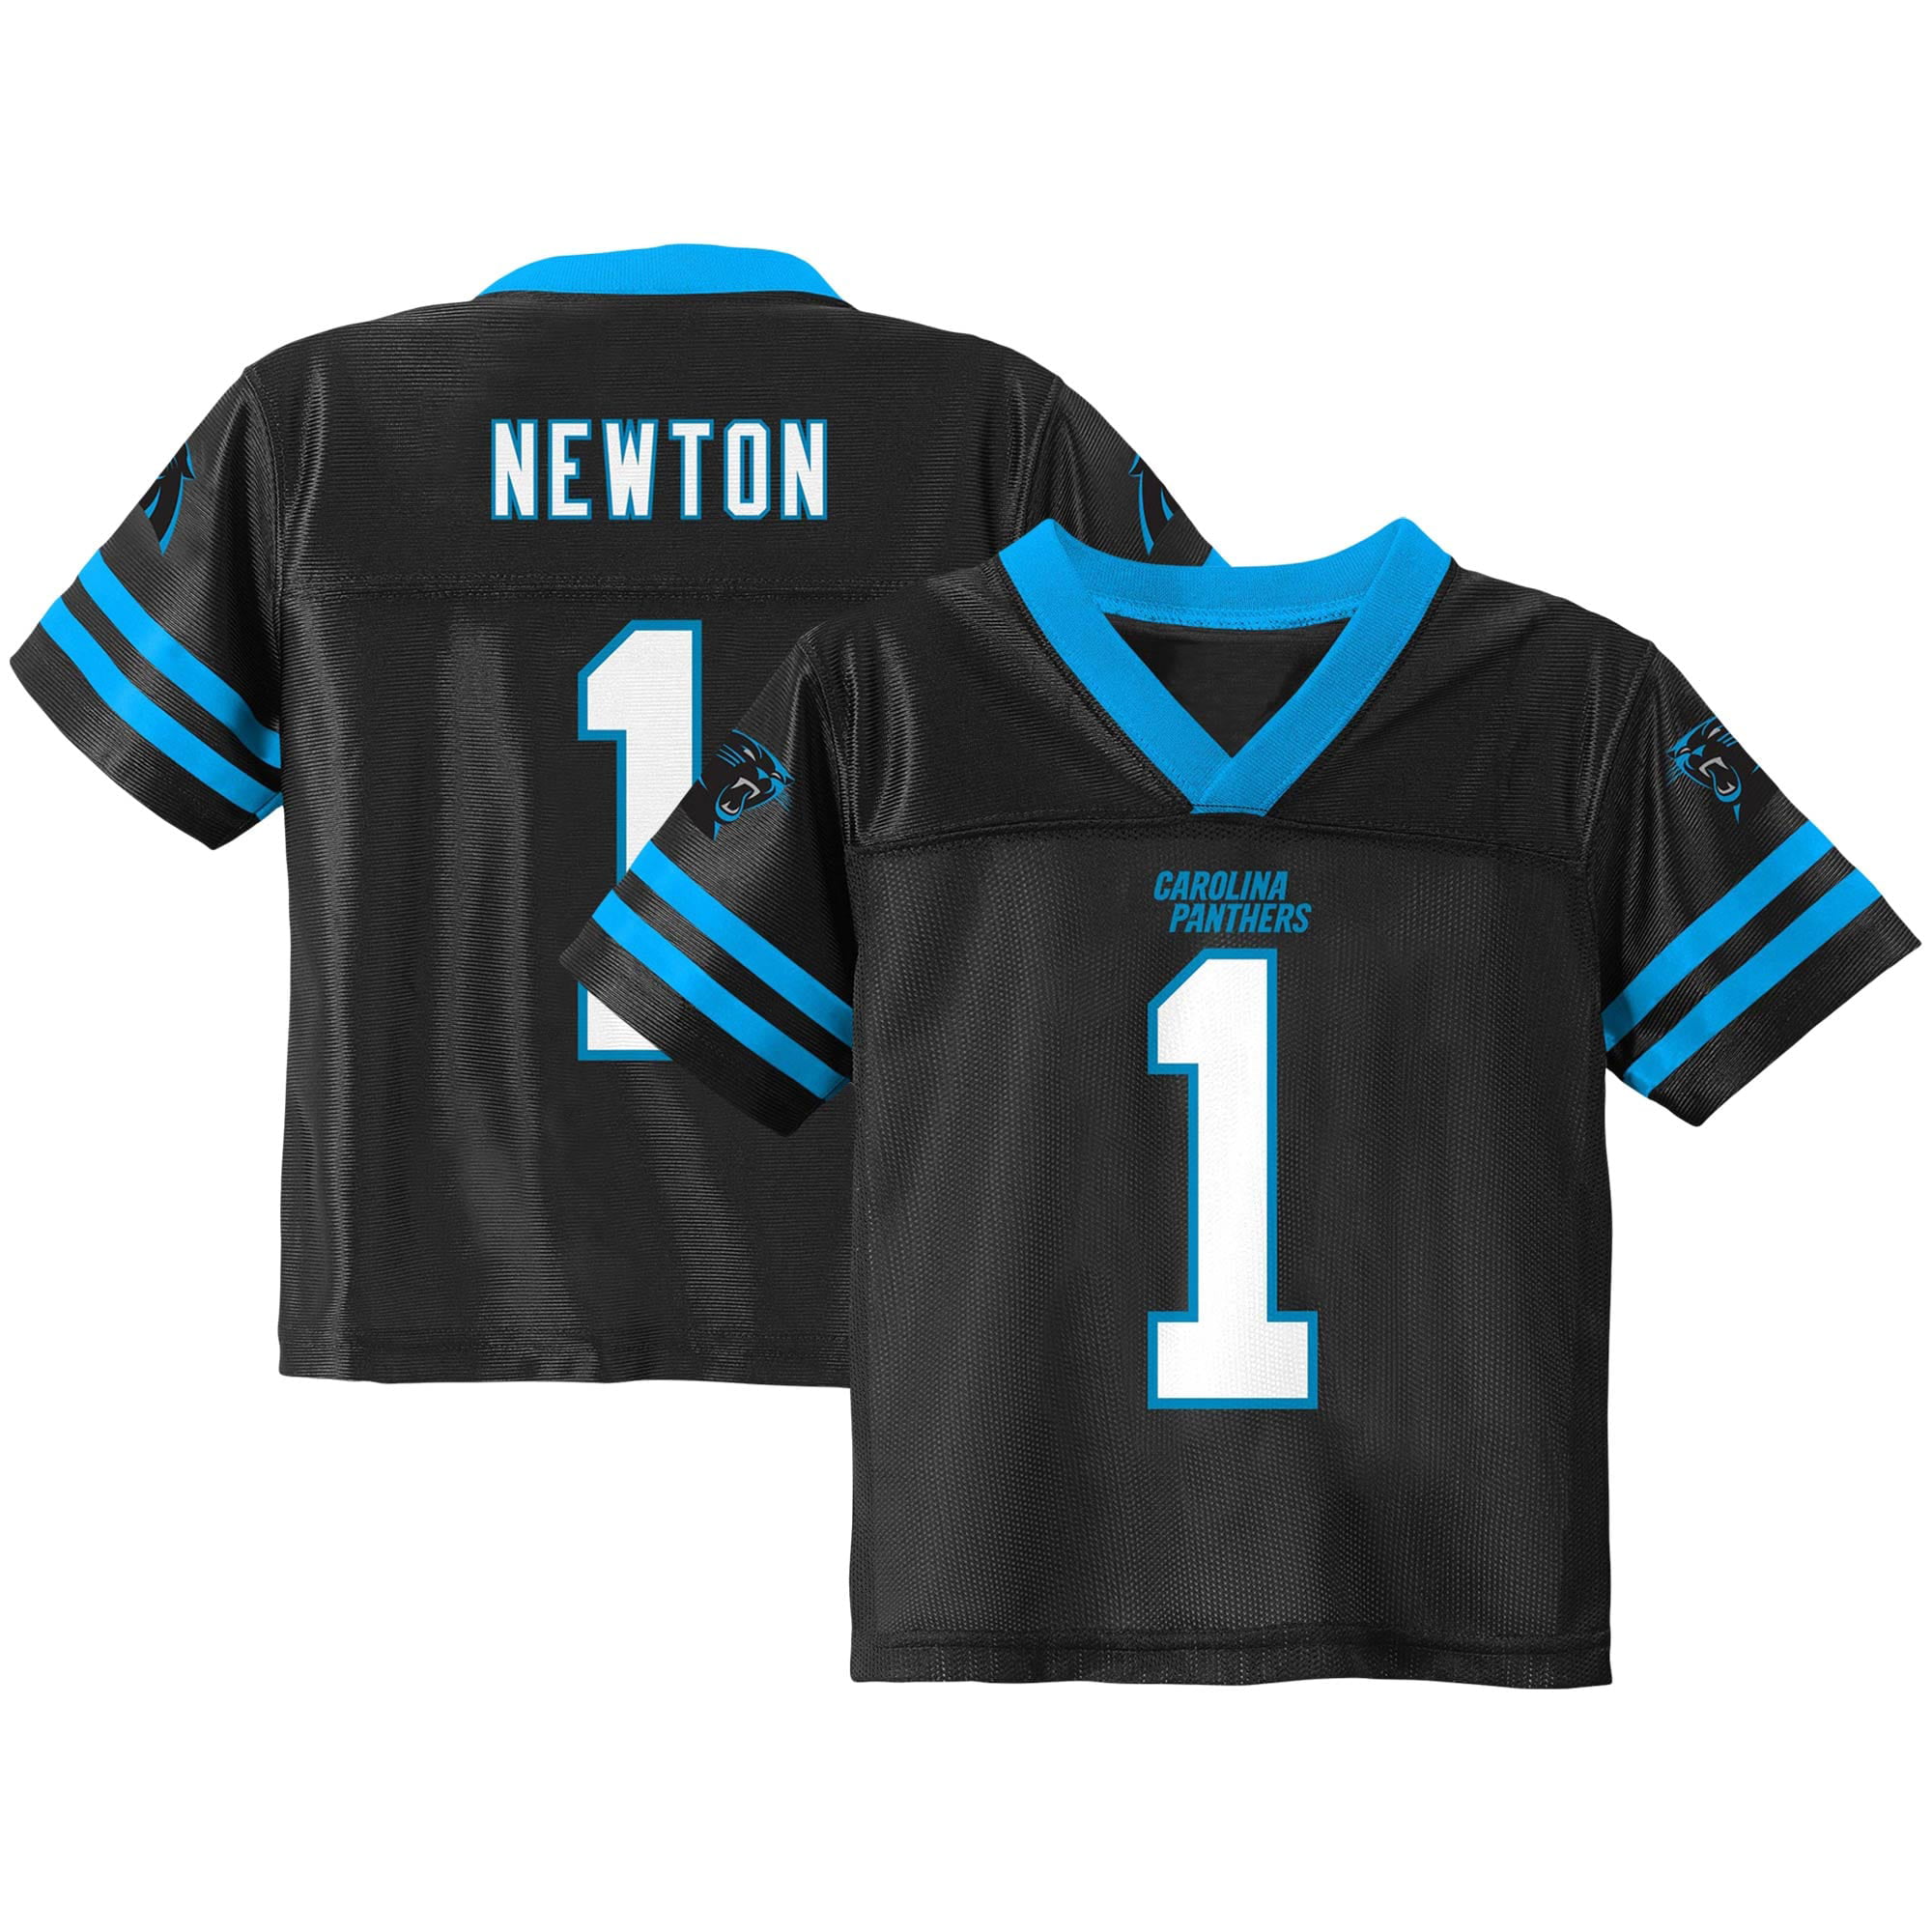 what is the c on cam newton's jersey